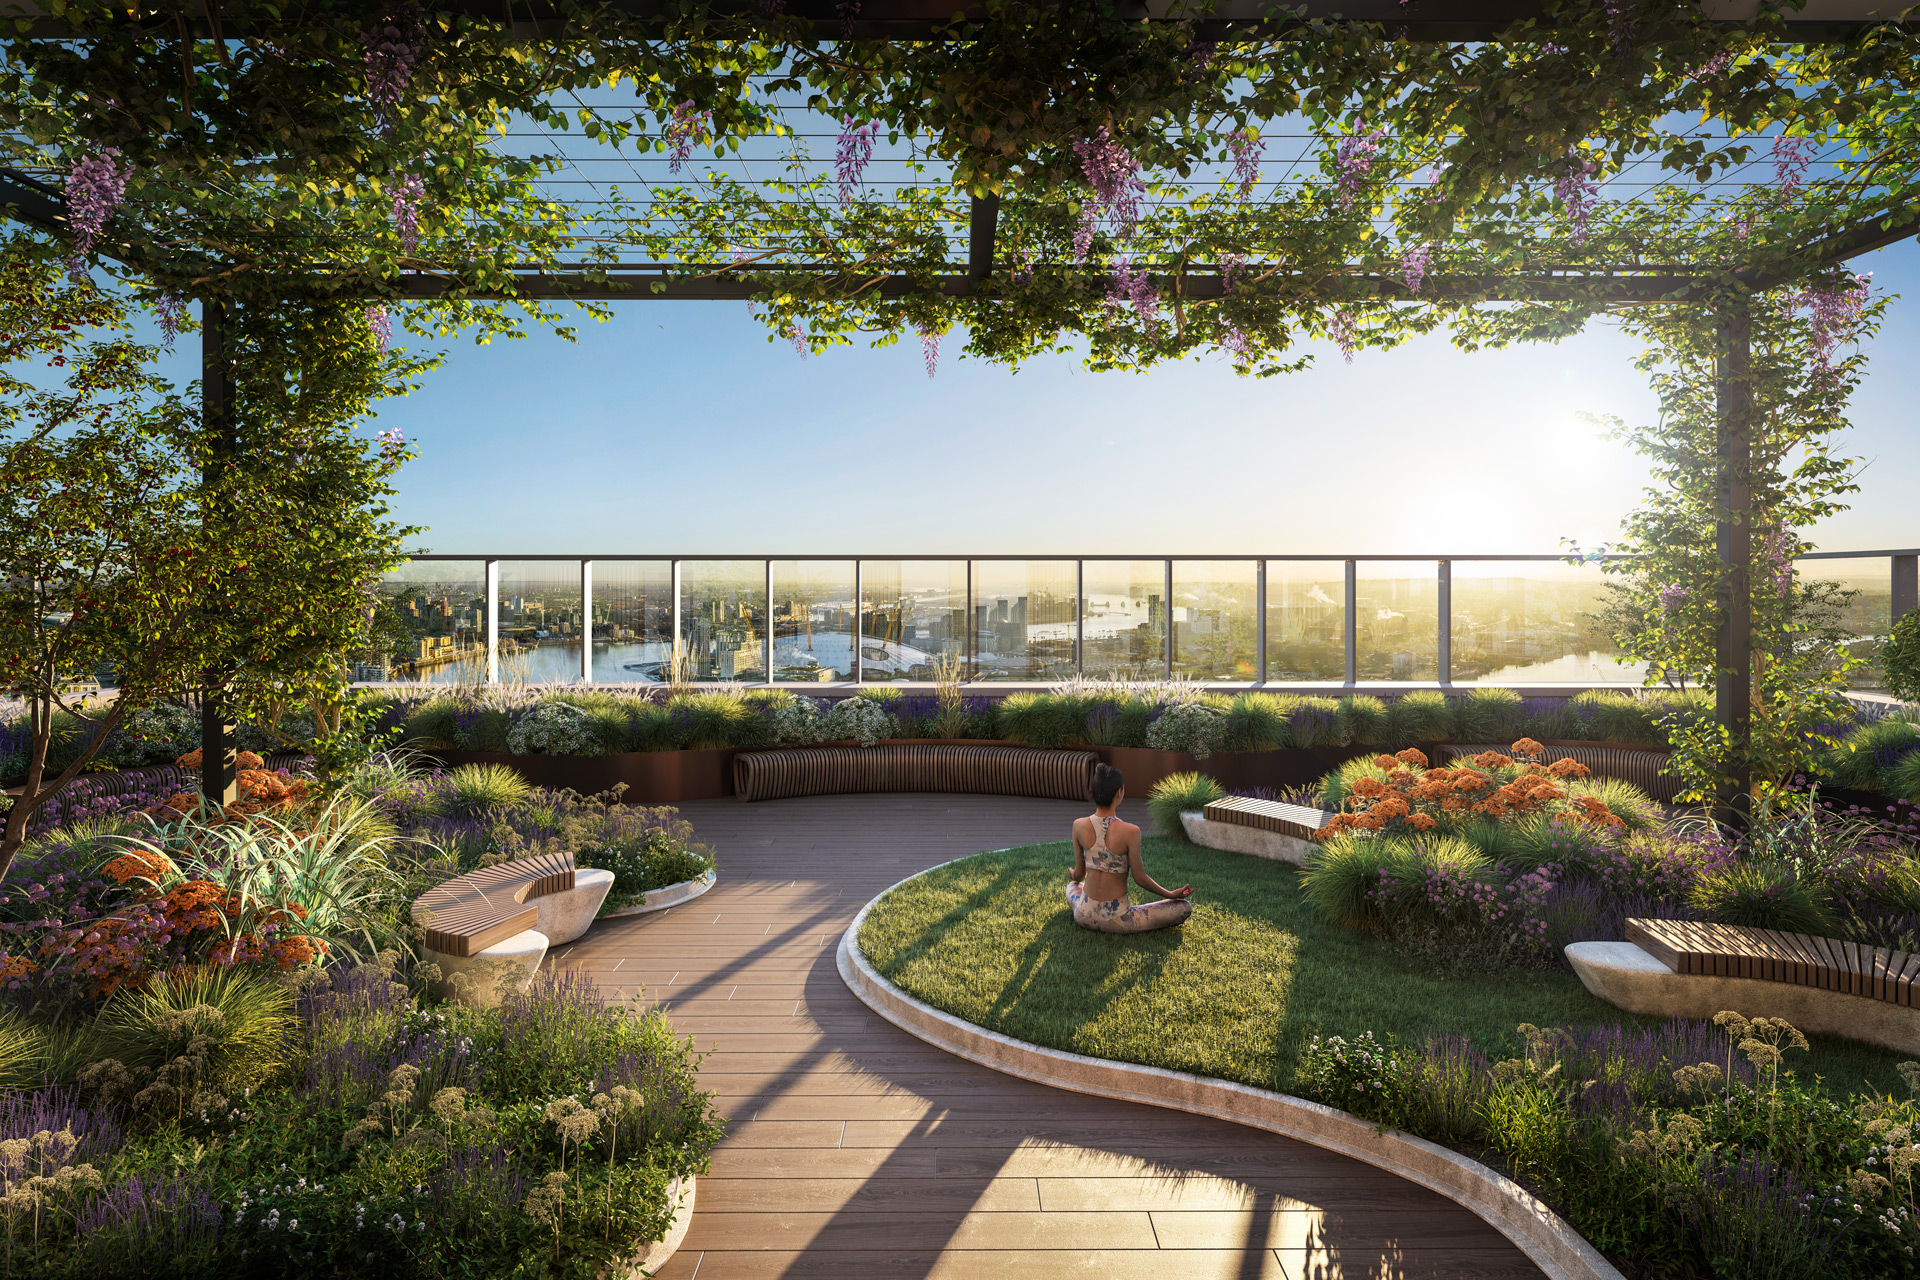 Sky terrace with a leafy canopy and grassy areas.